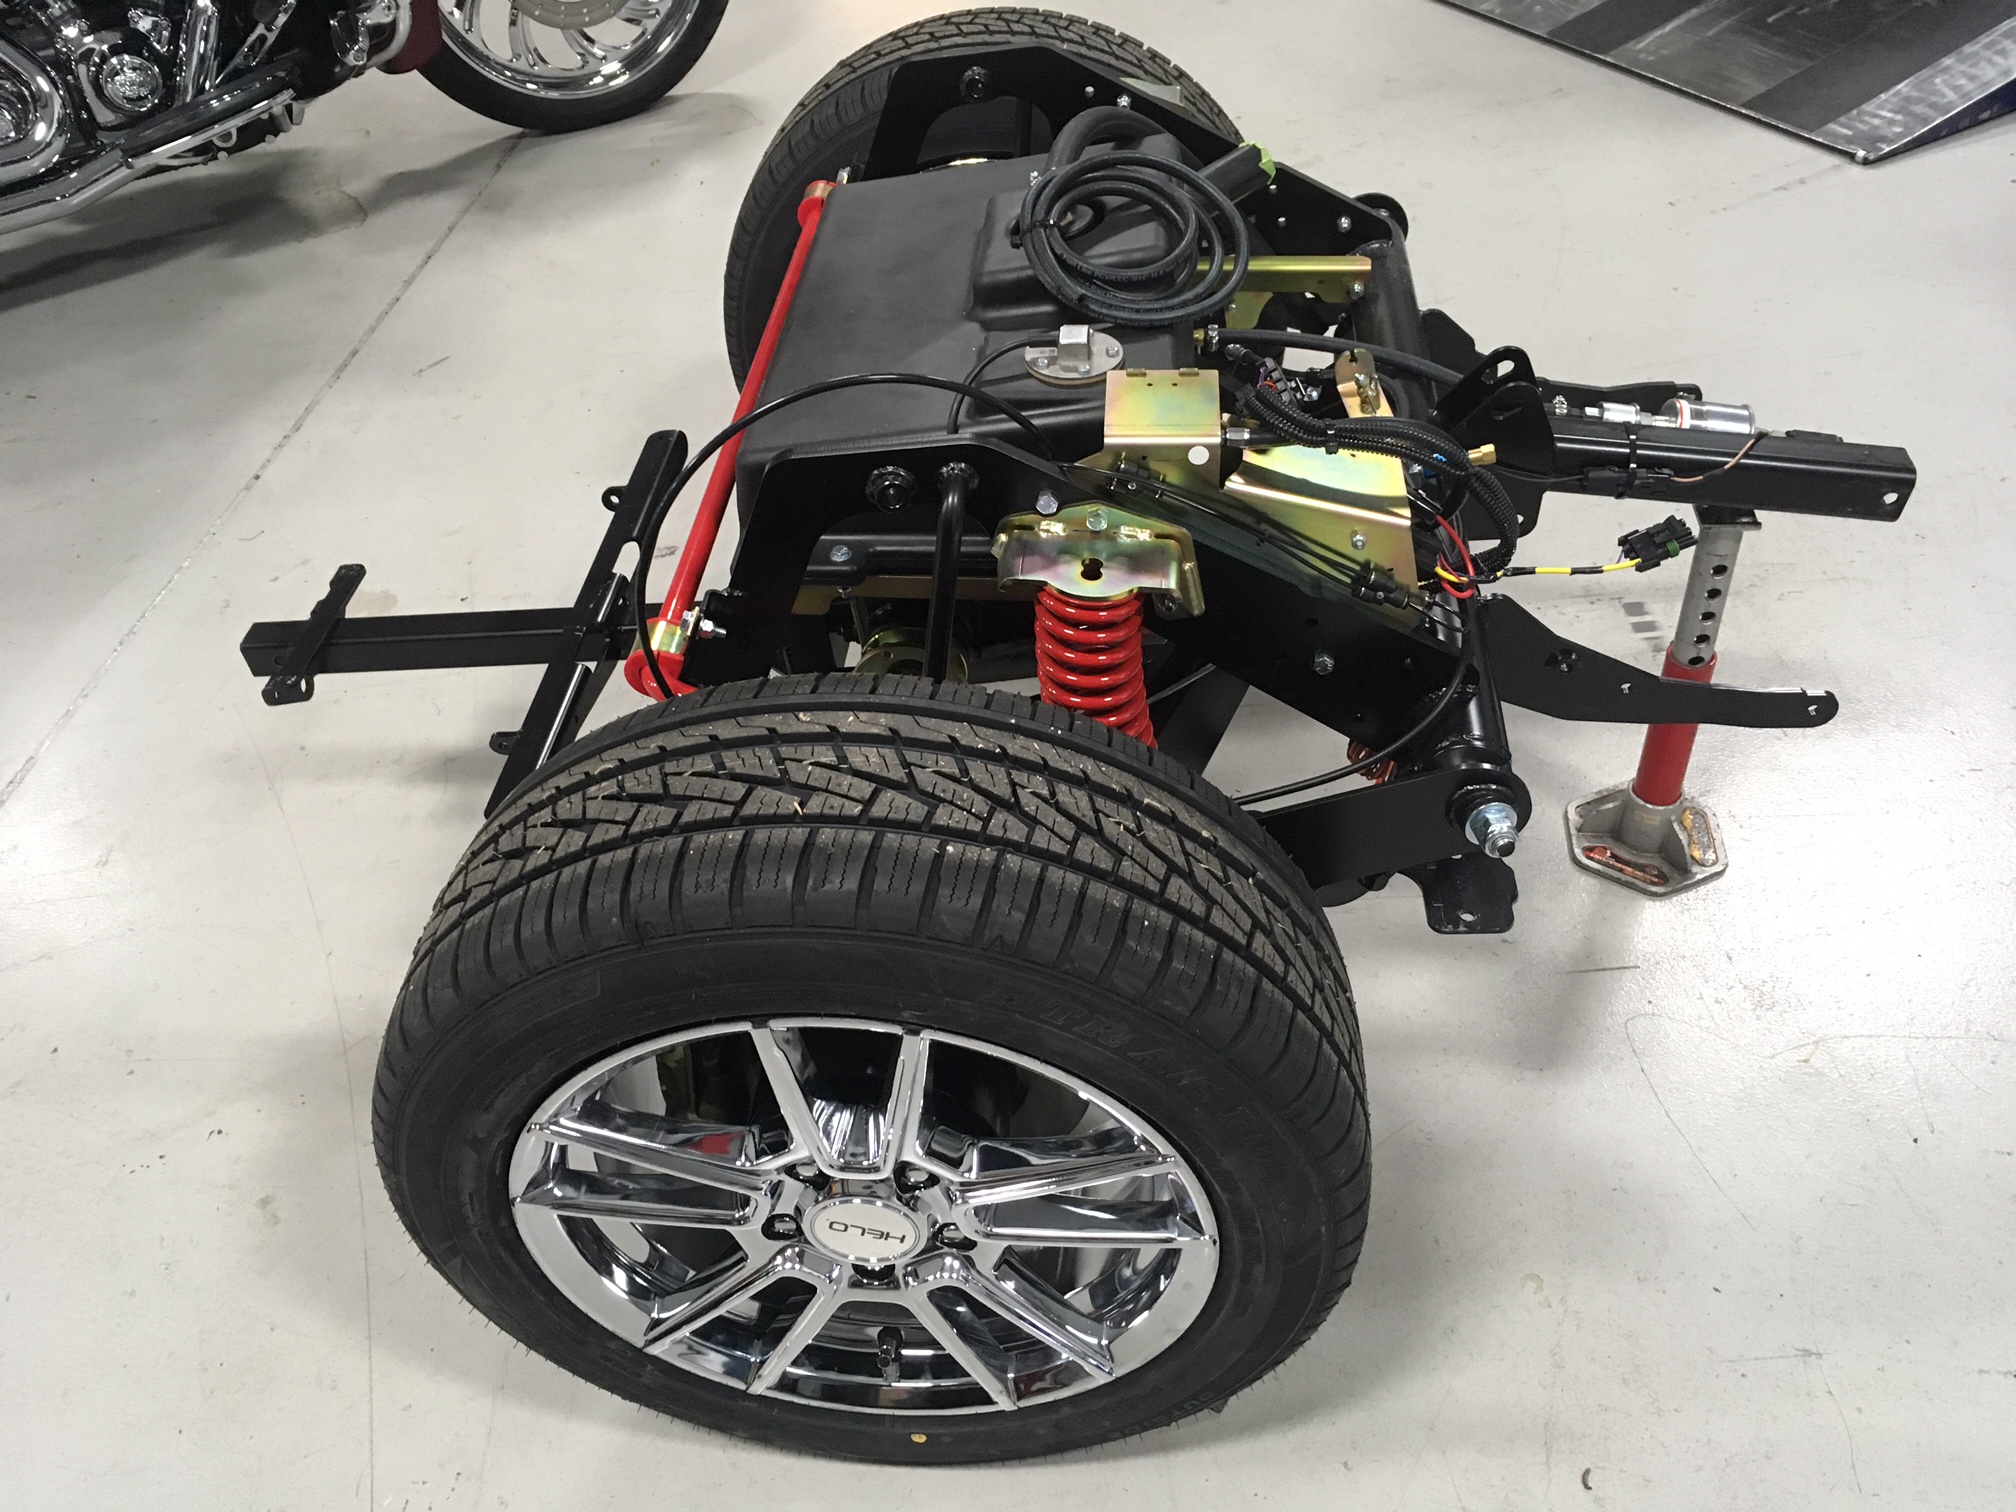 The ALL NEW HTX kit from Roadsmith trikes: For the new 2018 Goldwing